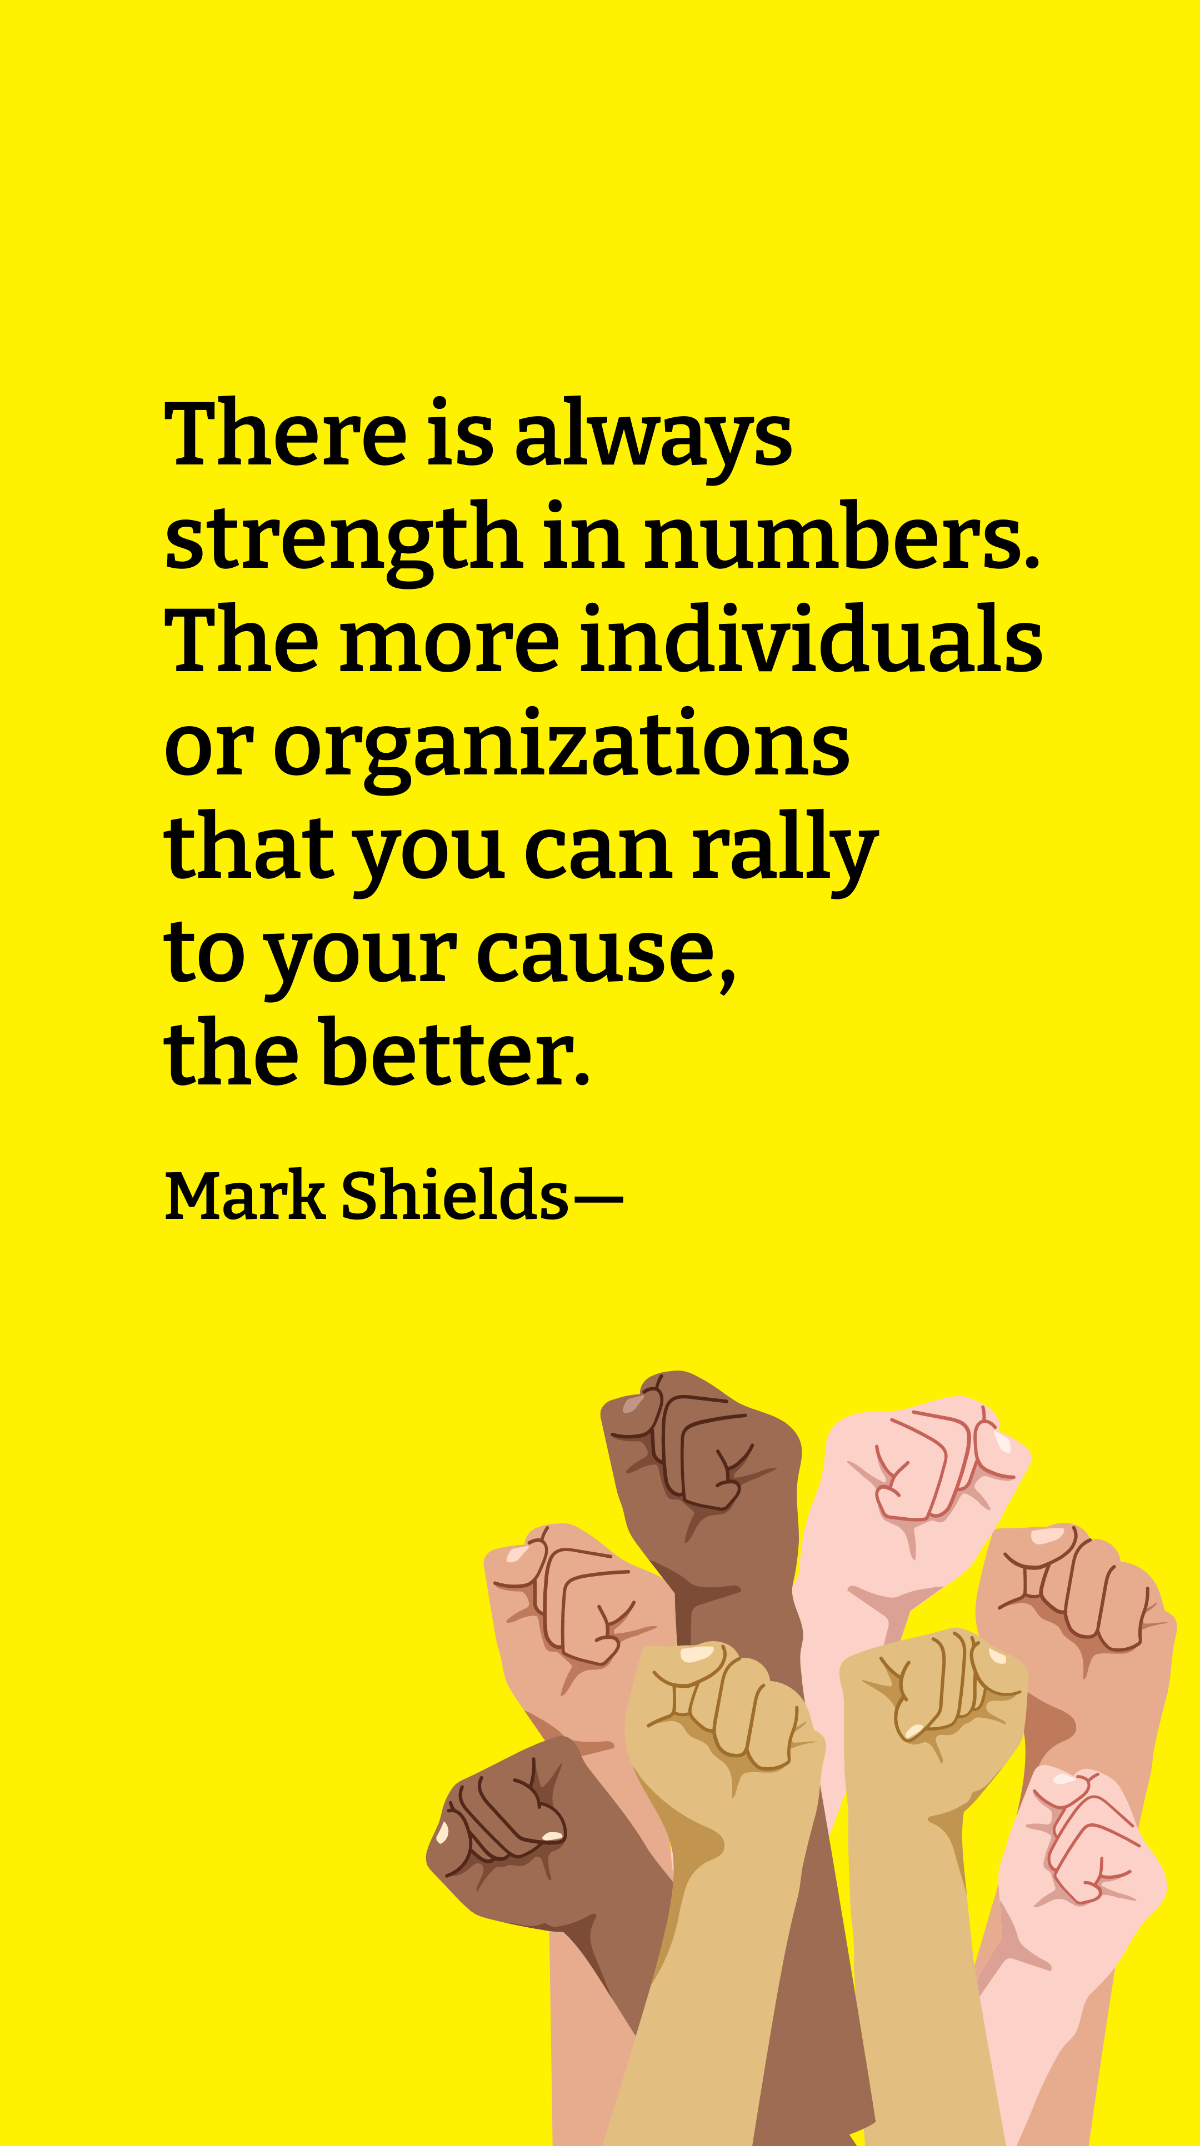 Mark Shields - There is always strength in numbers. The more individuals or organizations that you can rally to your cause, the better. Template